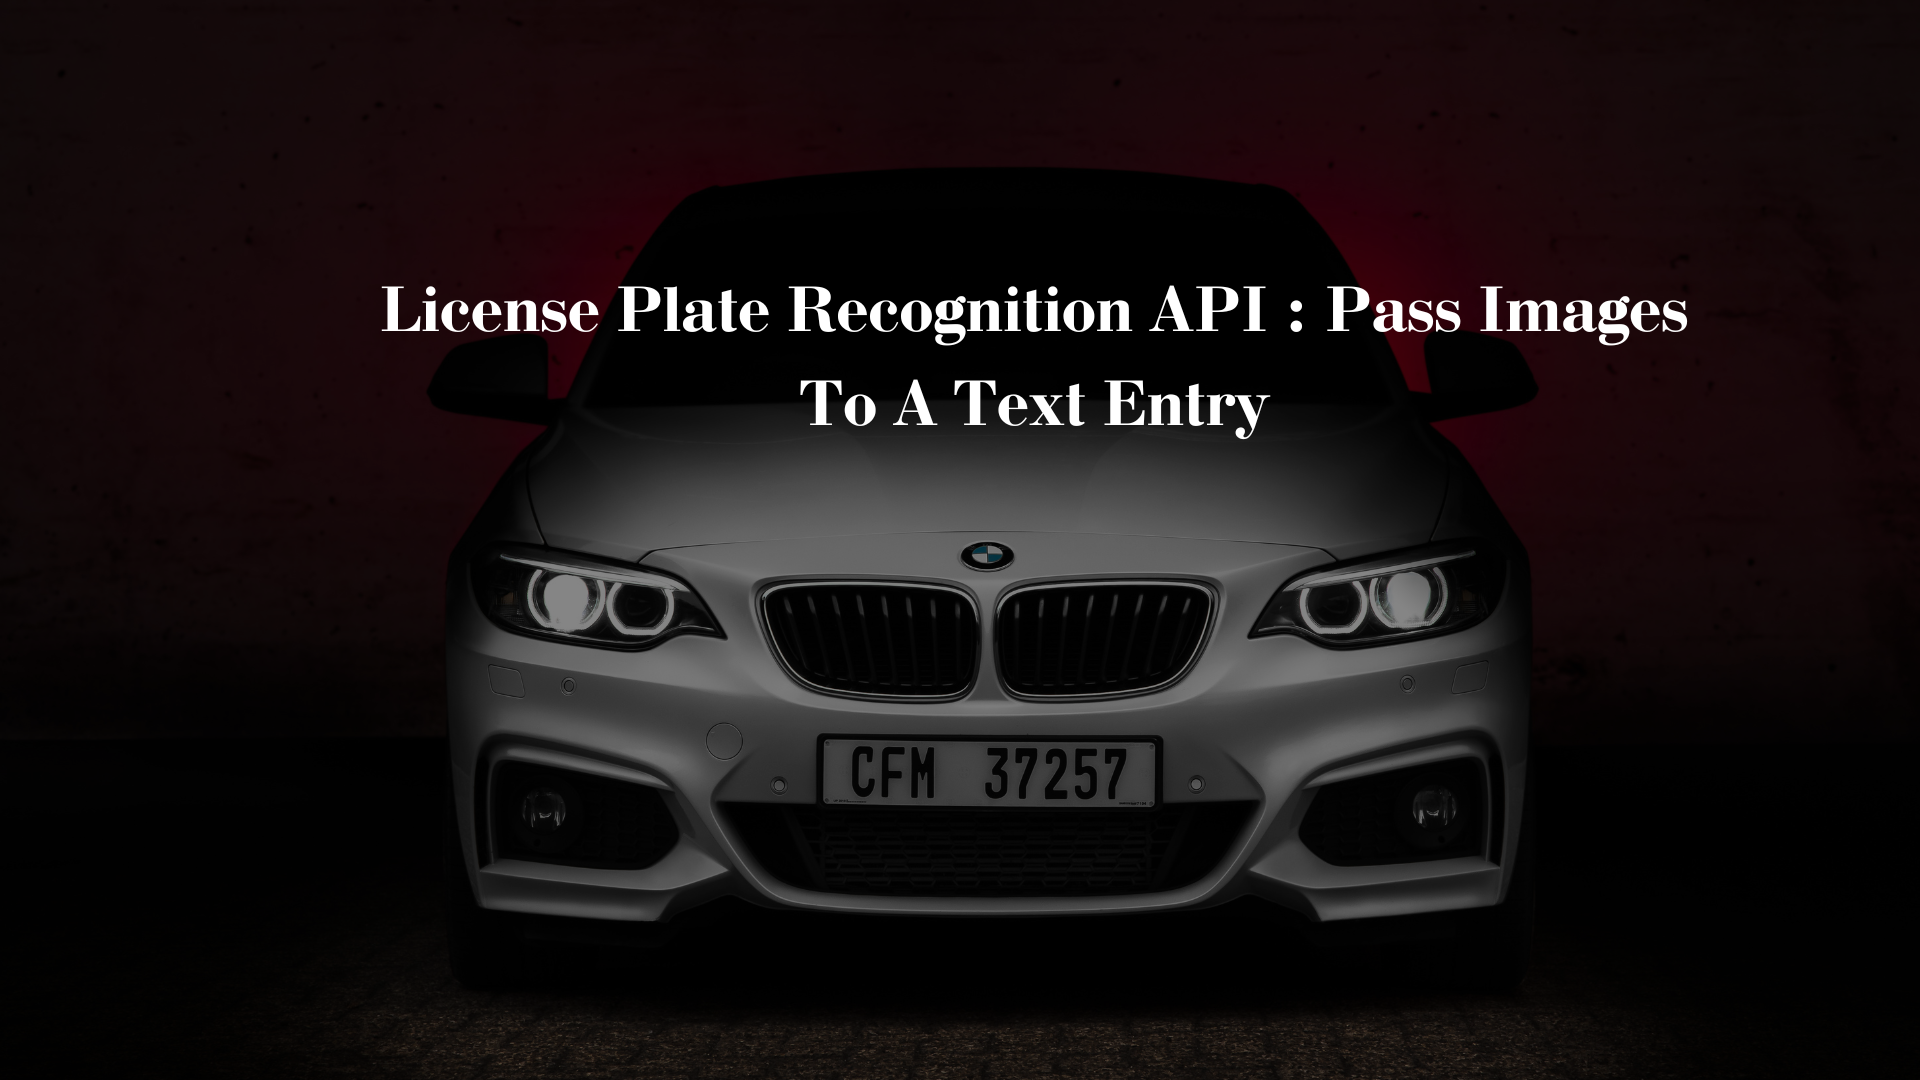 License Plate Recognition API : Pass Images To A Text Entry